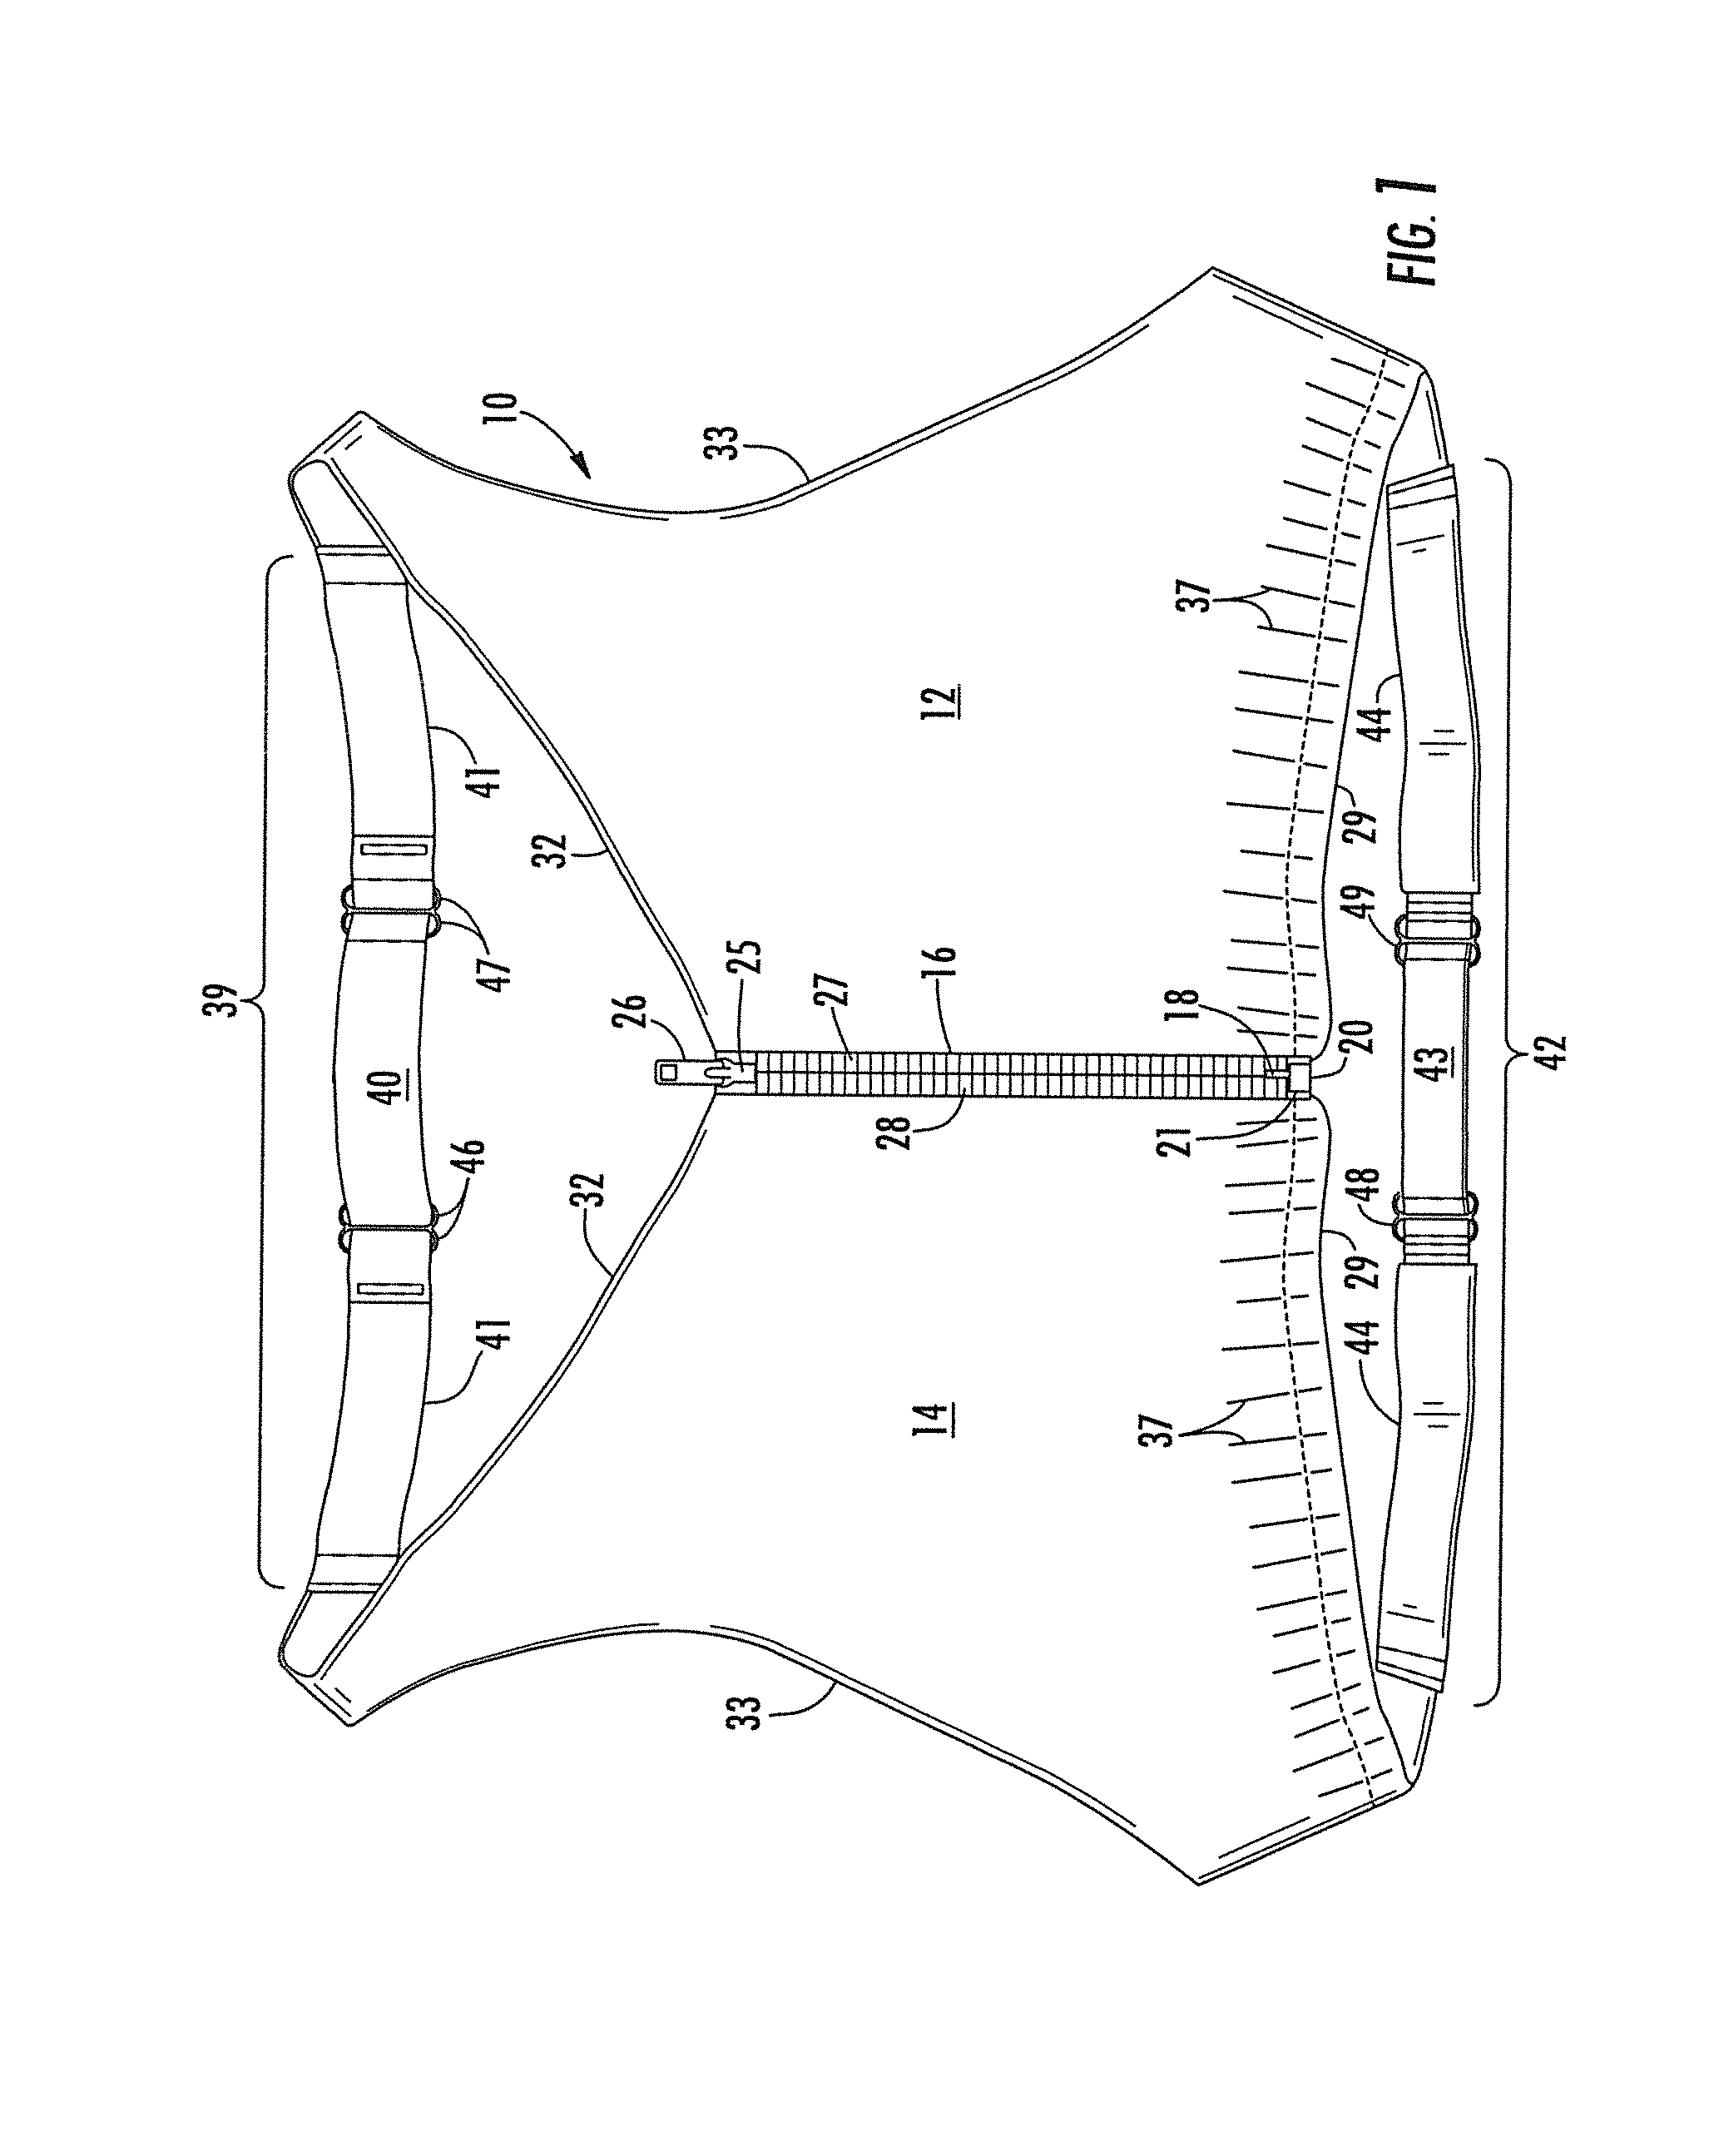 Method for making and using a torso top outer garment, and resulting garment